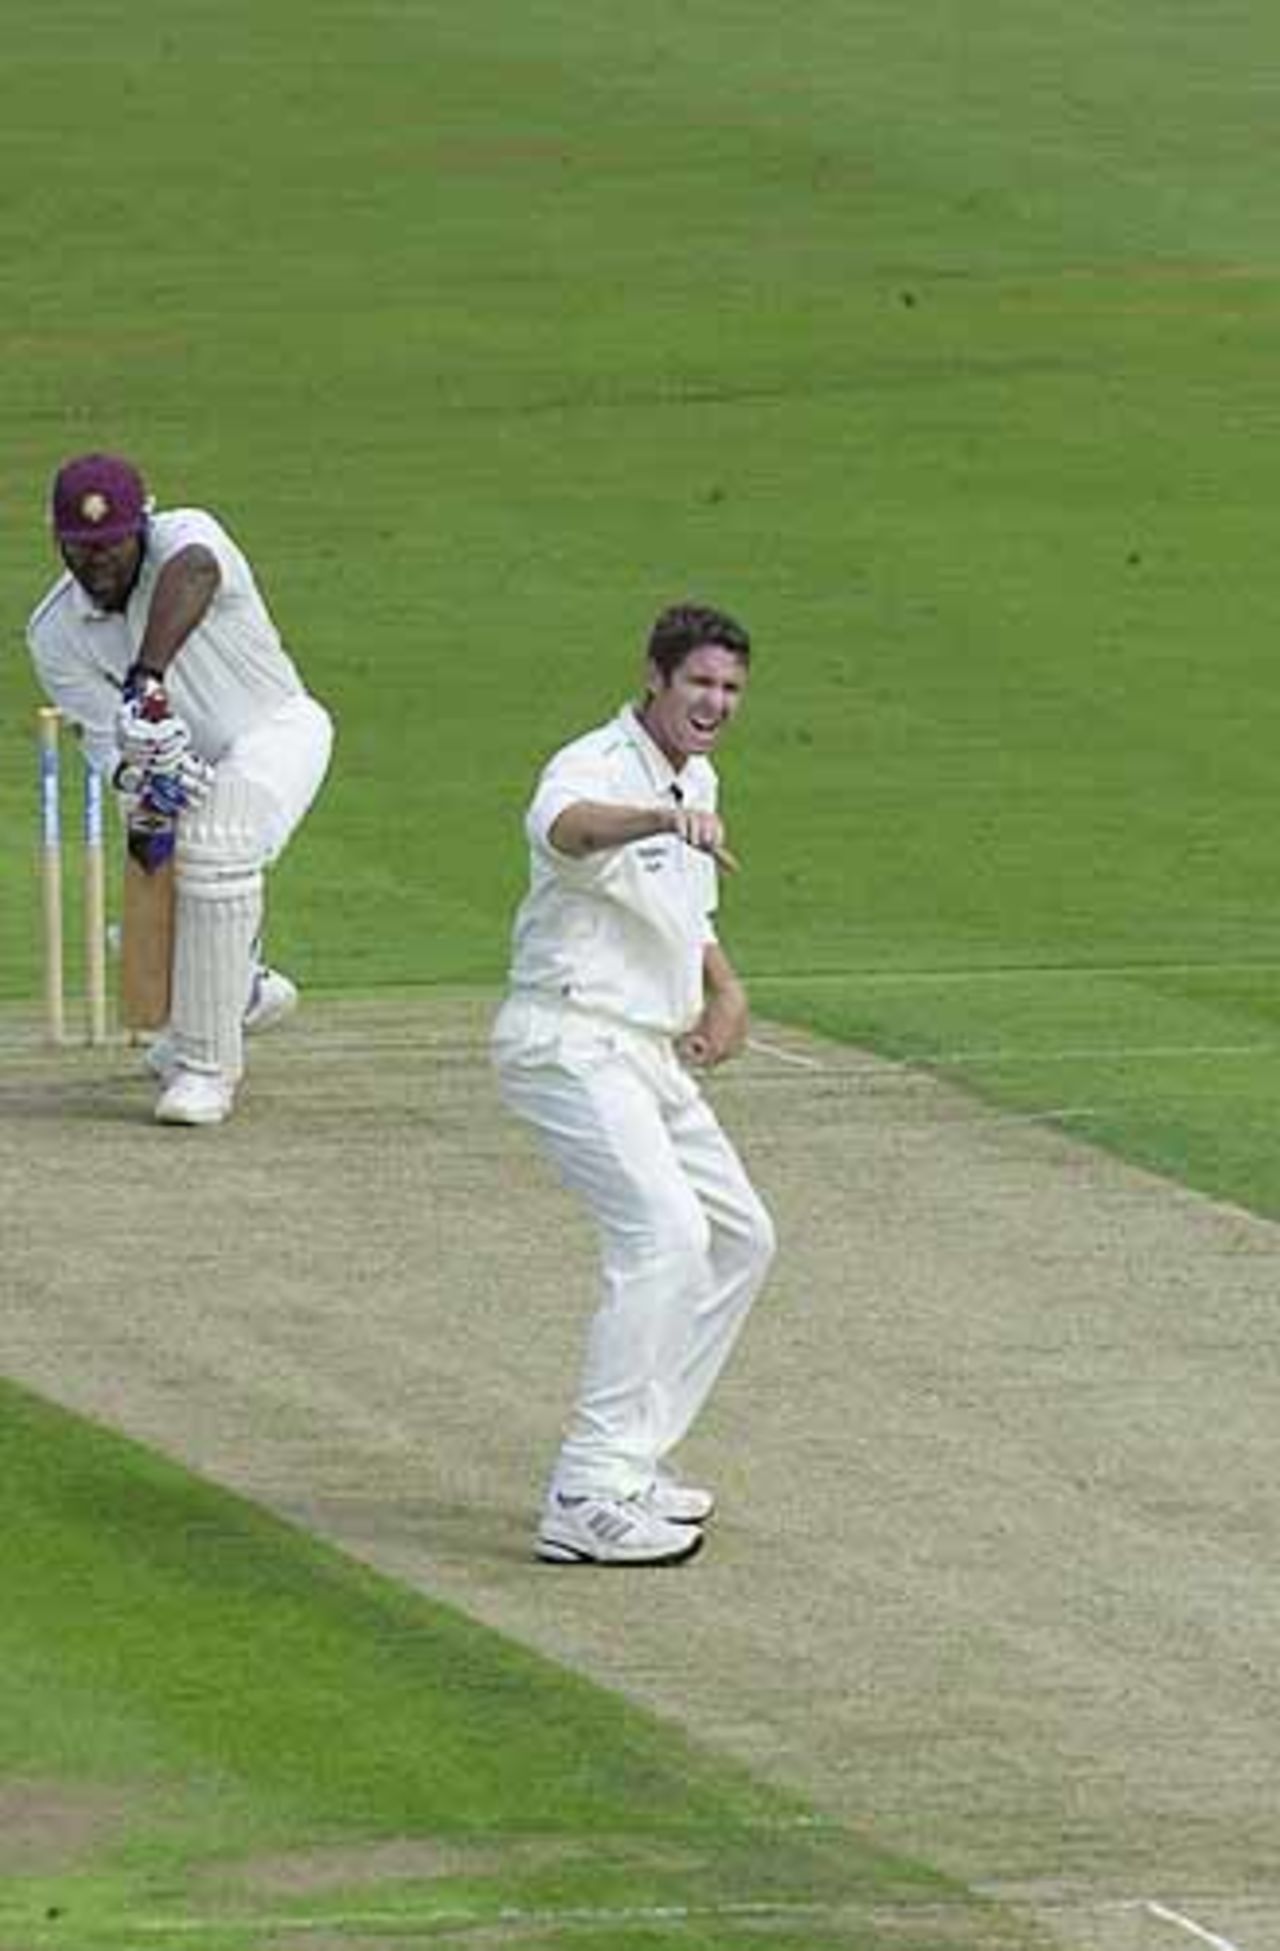 Bowler Ben Trott seems to give his own lbw appeal against Rollins the thumbs down, CricInfo Championship, 8th August 2001